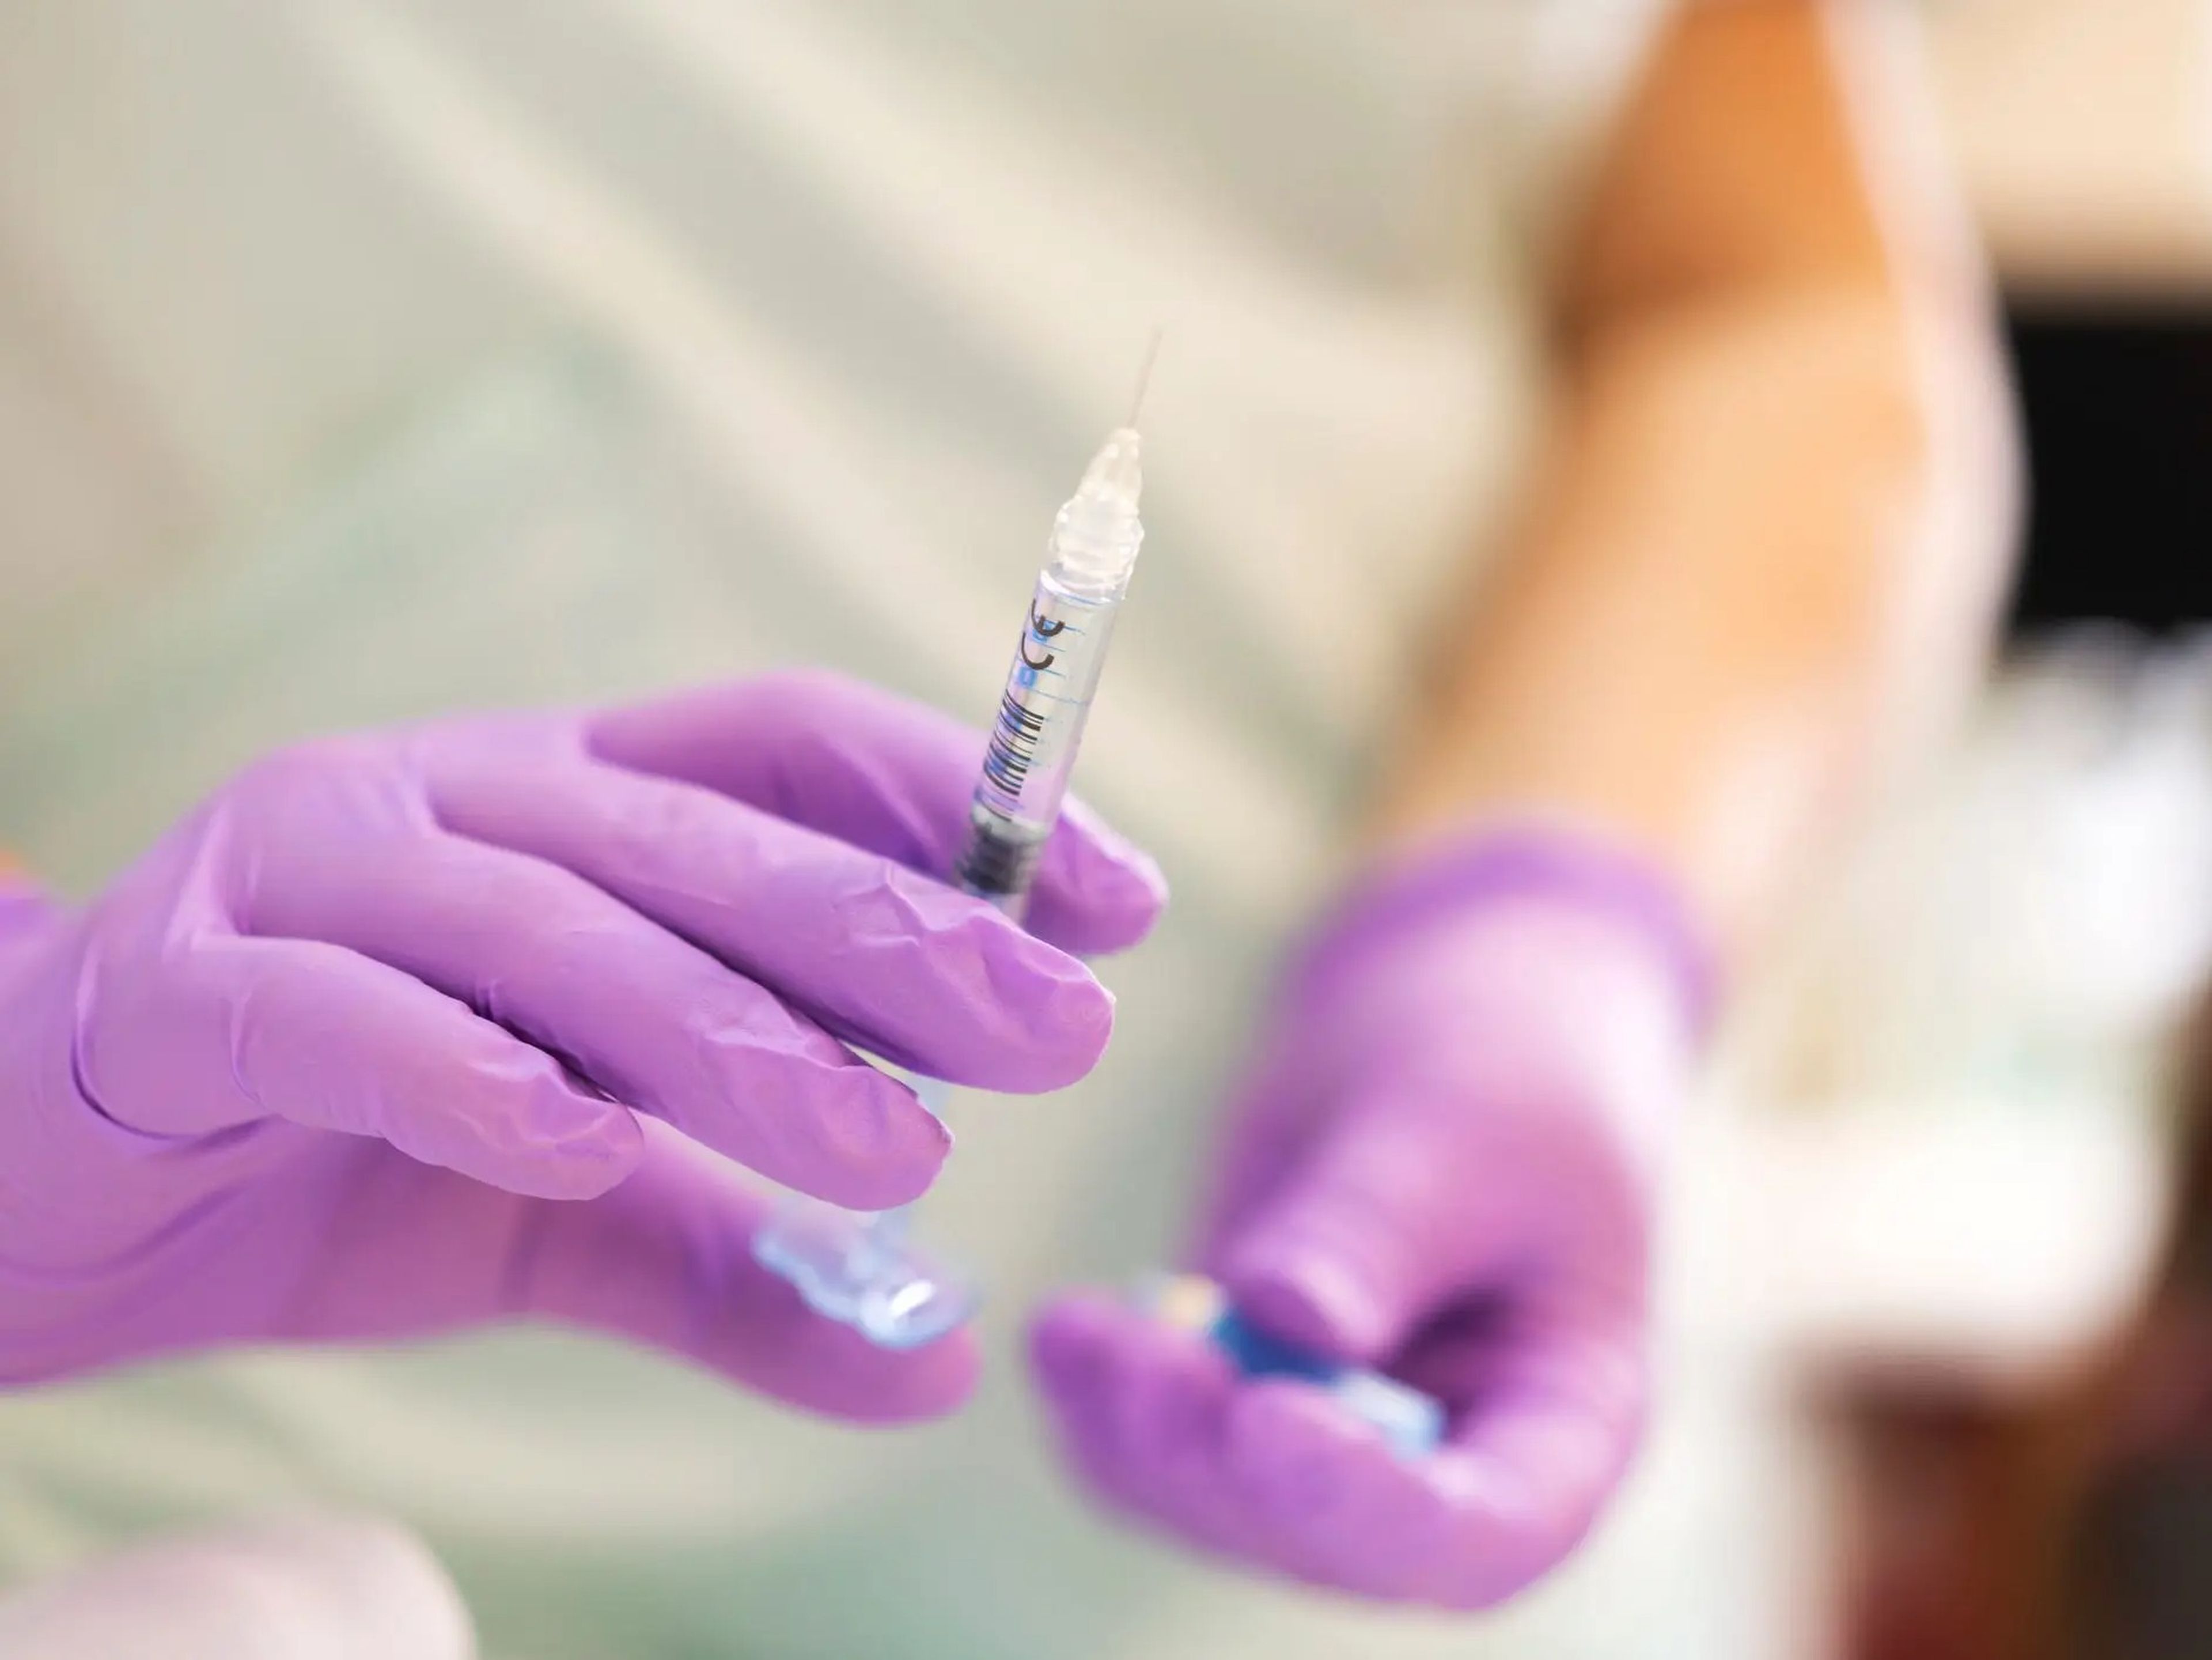 A person wearing purple plastic gloves and holding a syringe.